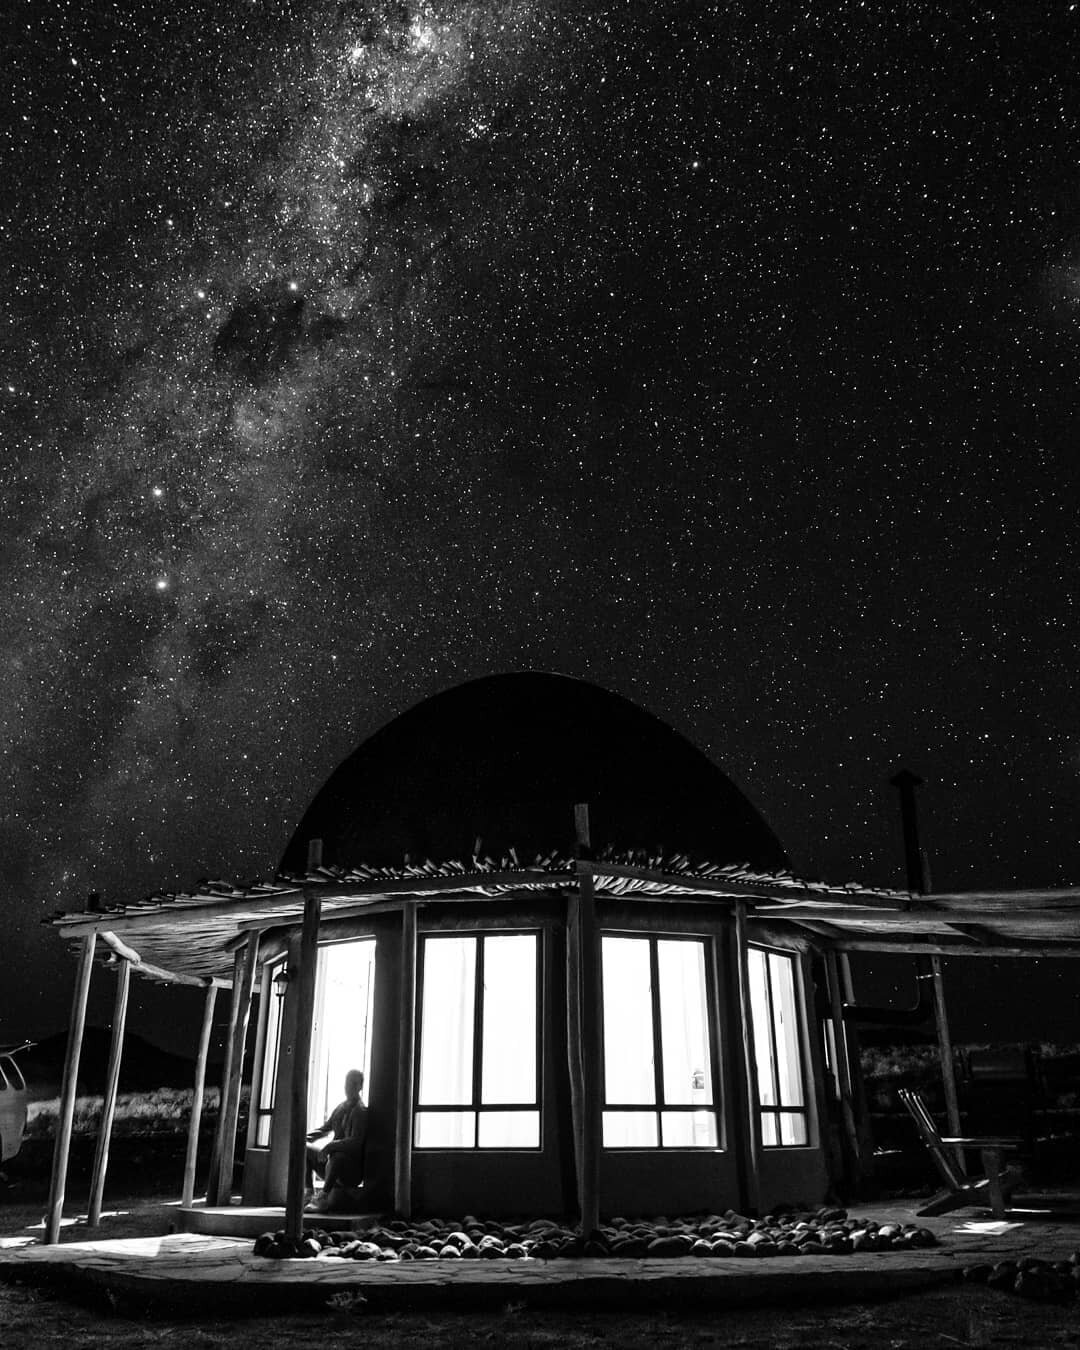 Prepare for lift off
Shot by @marcusboydgoldbas in Namibia
.
.
.
.
.
.
.
.
.
.
#sonyalpha #blackandwhite #photography #travel #adventure #stars #nightsky #celestial #universe #expanse #galaxy #epic #fun #getoutstayout #gobal